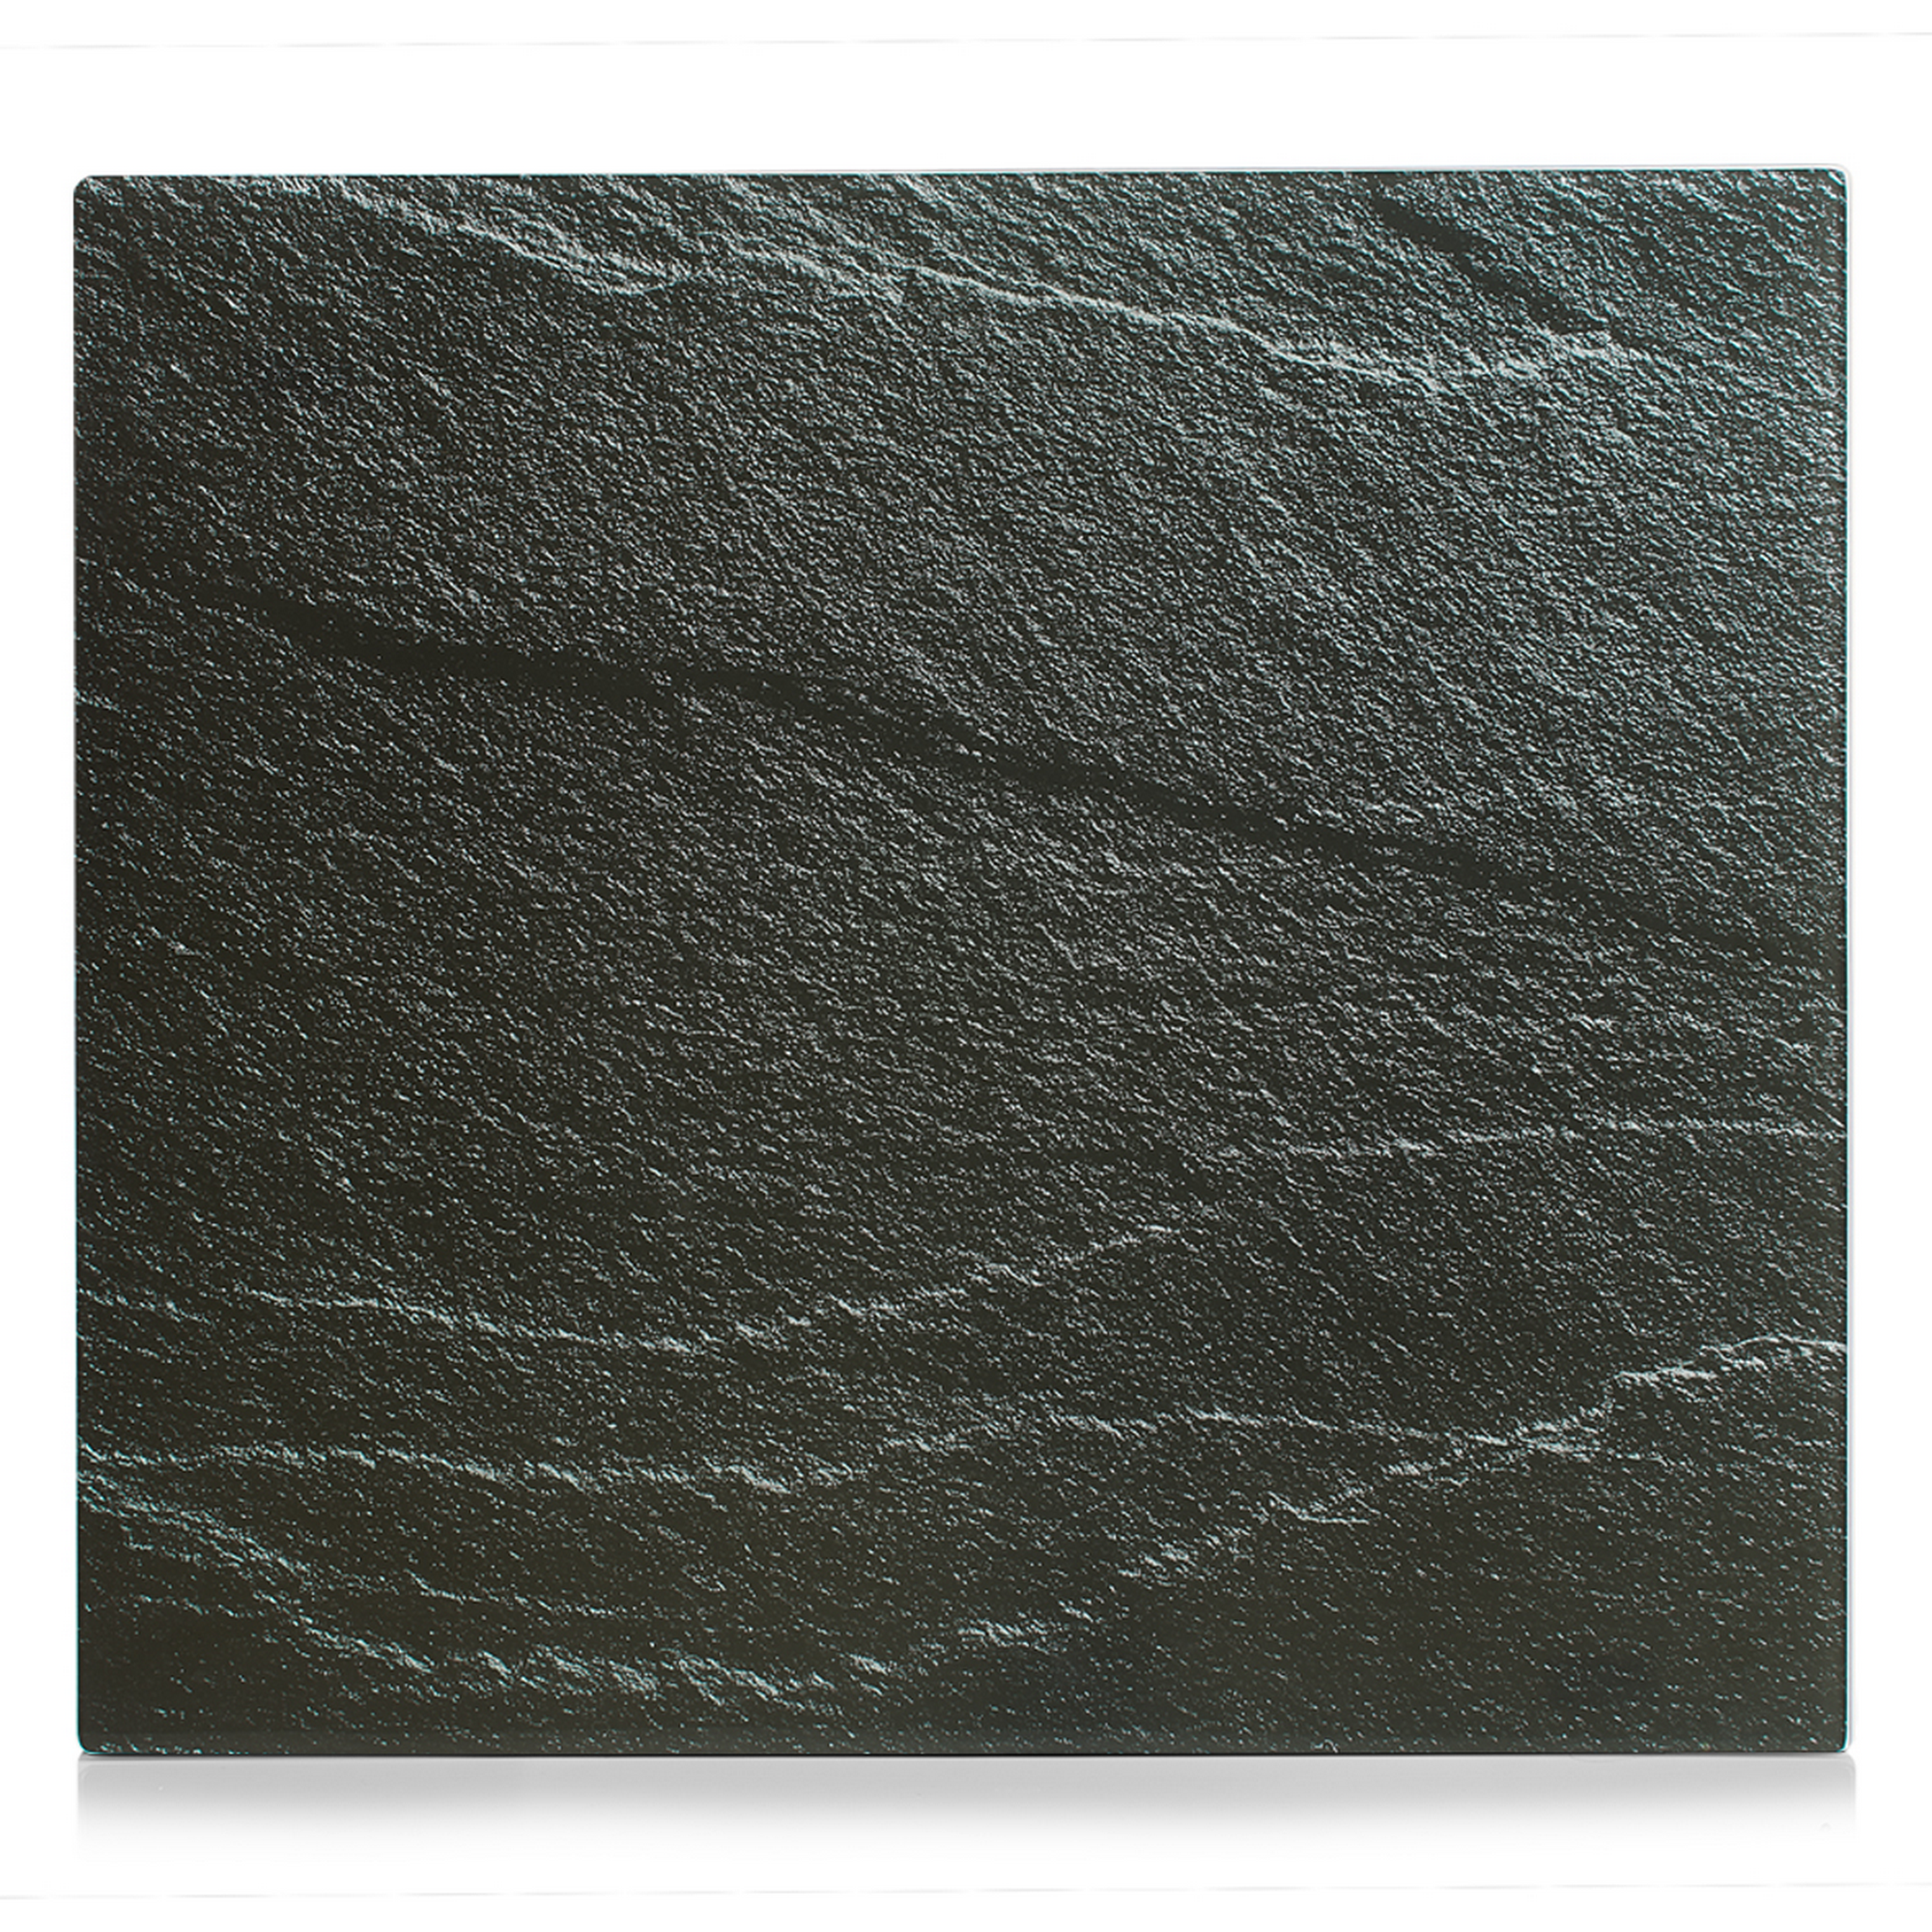 Herdblende 'Schiefer' mehrfarbig 56 x 0,8 x 50 cm + product picture